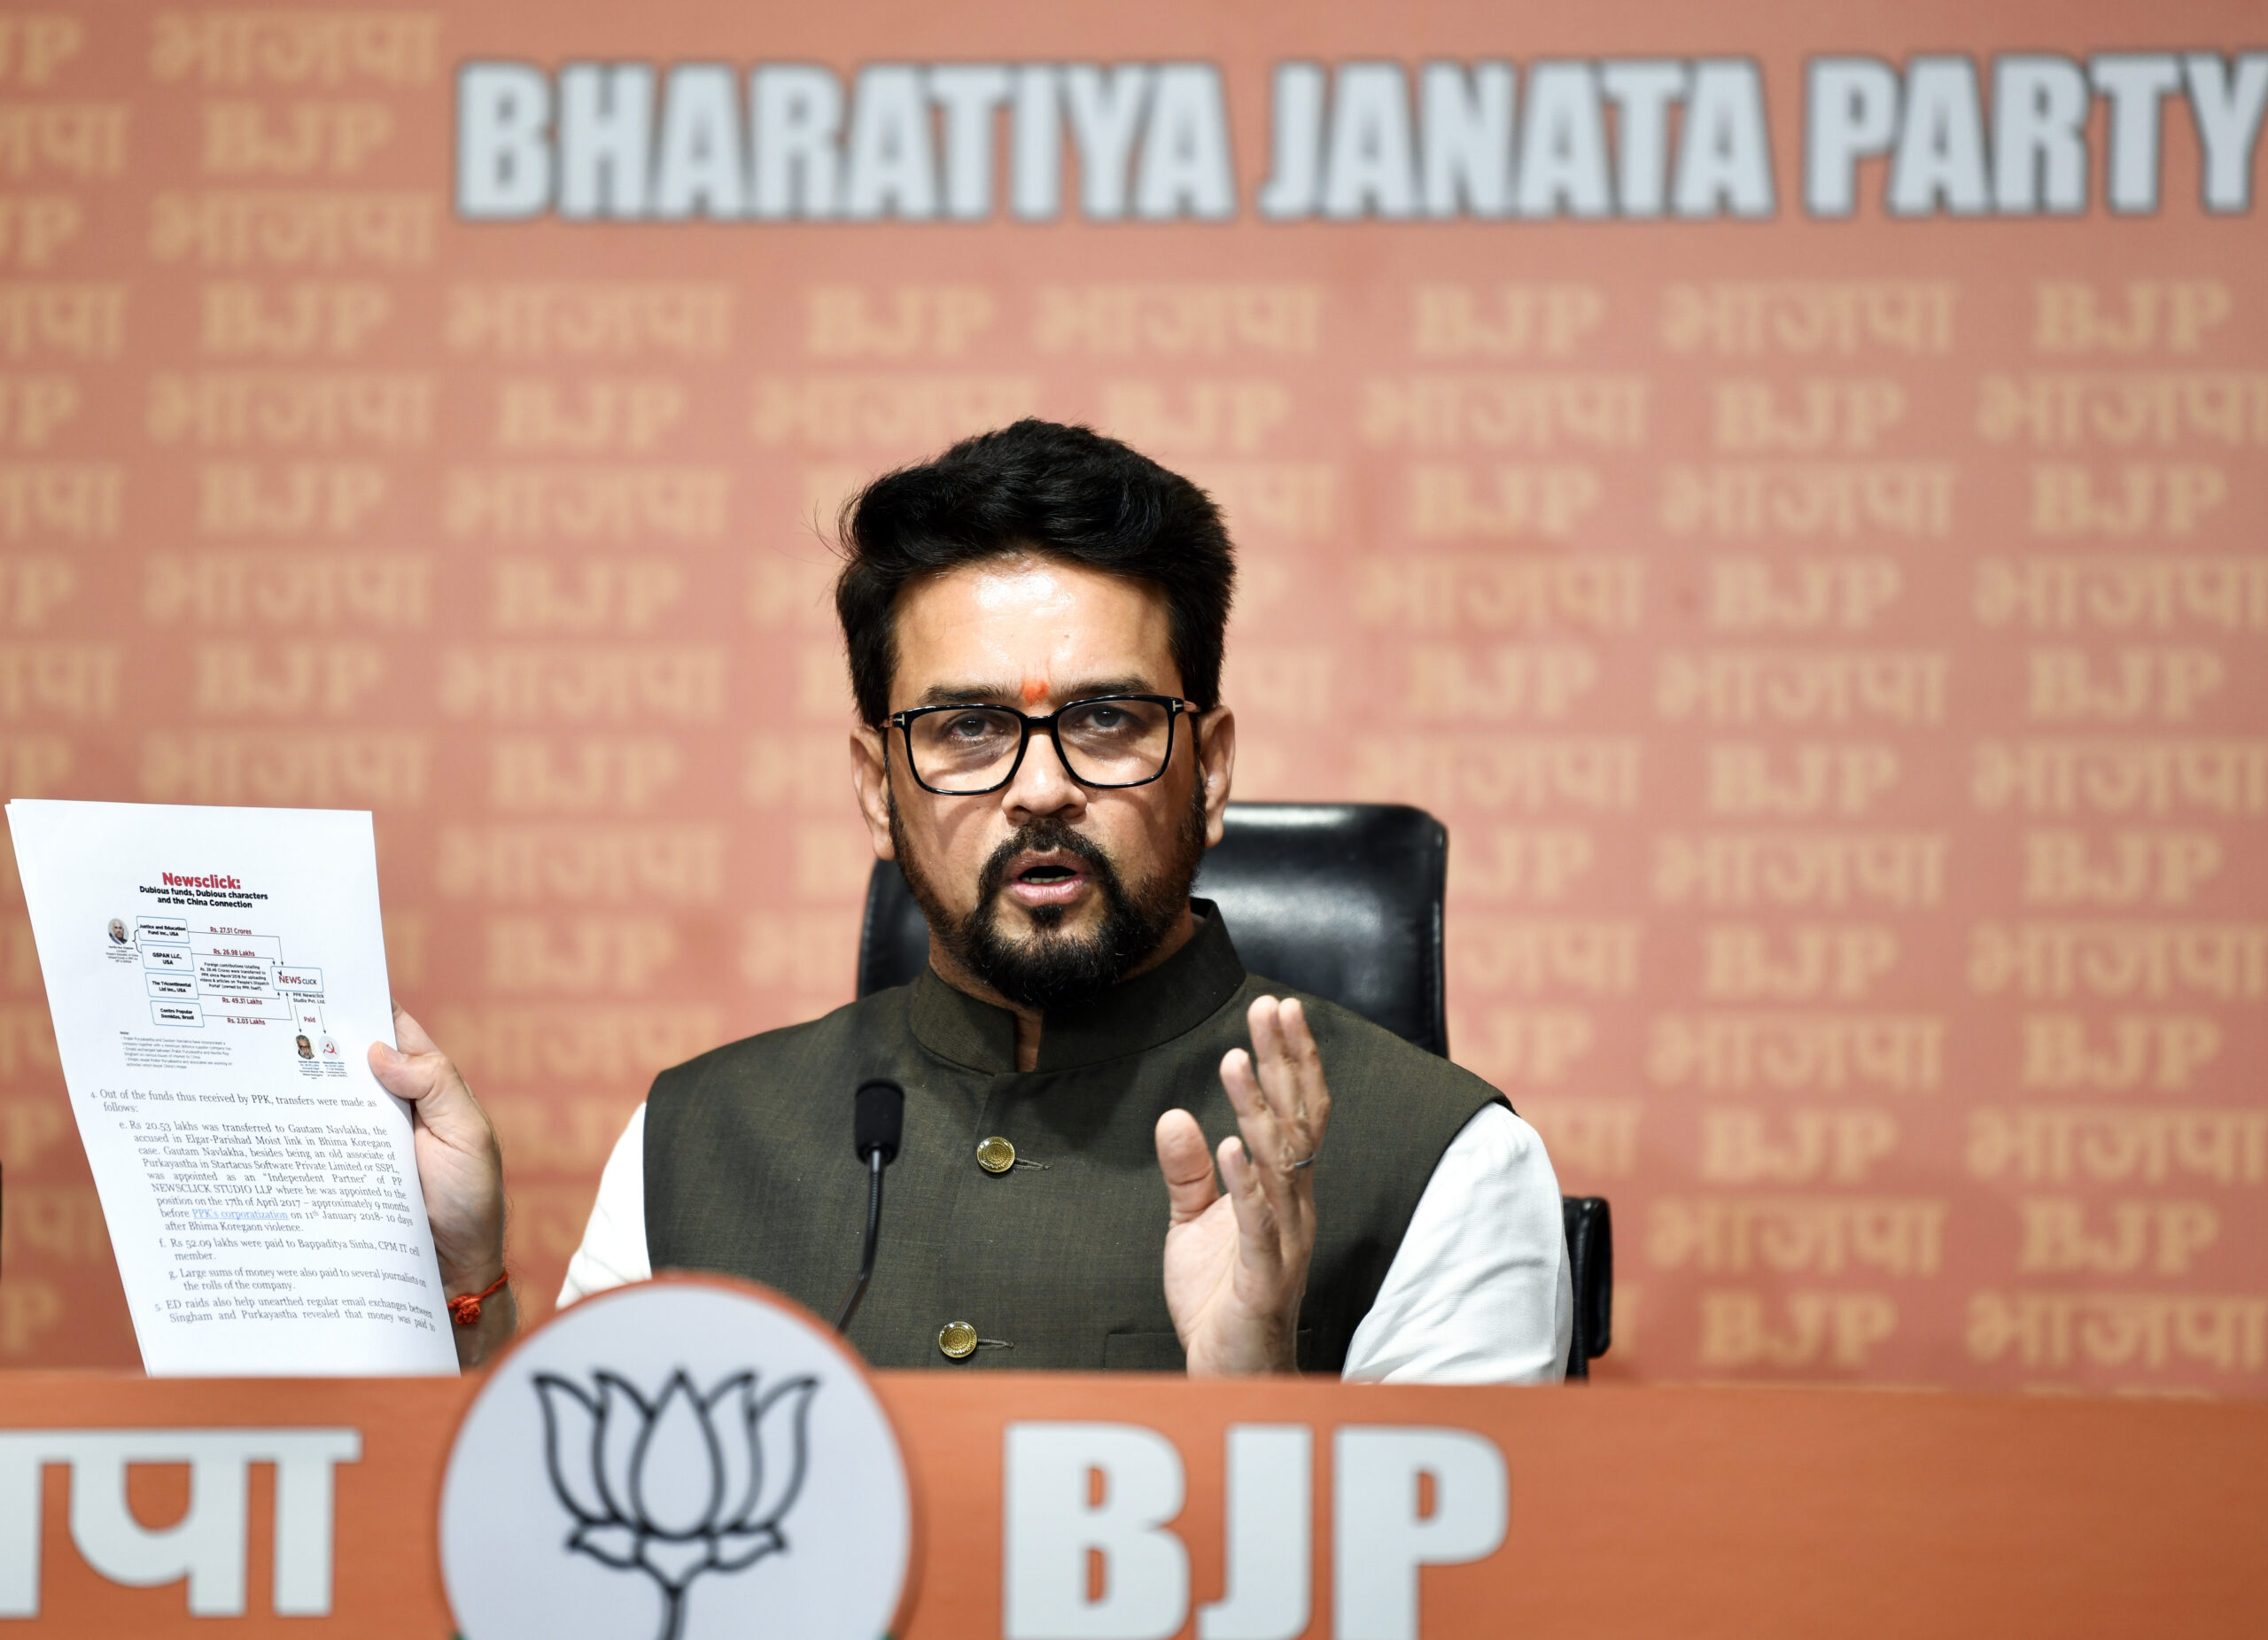 Lot could be saved, says Anurag Thakur as praises the benefits of one nation, one election